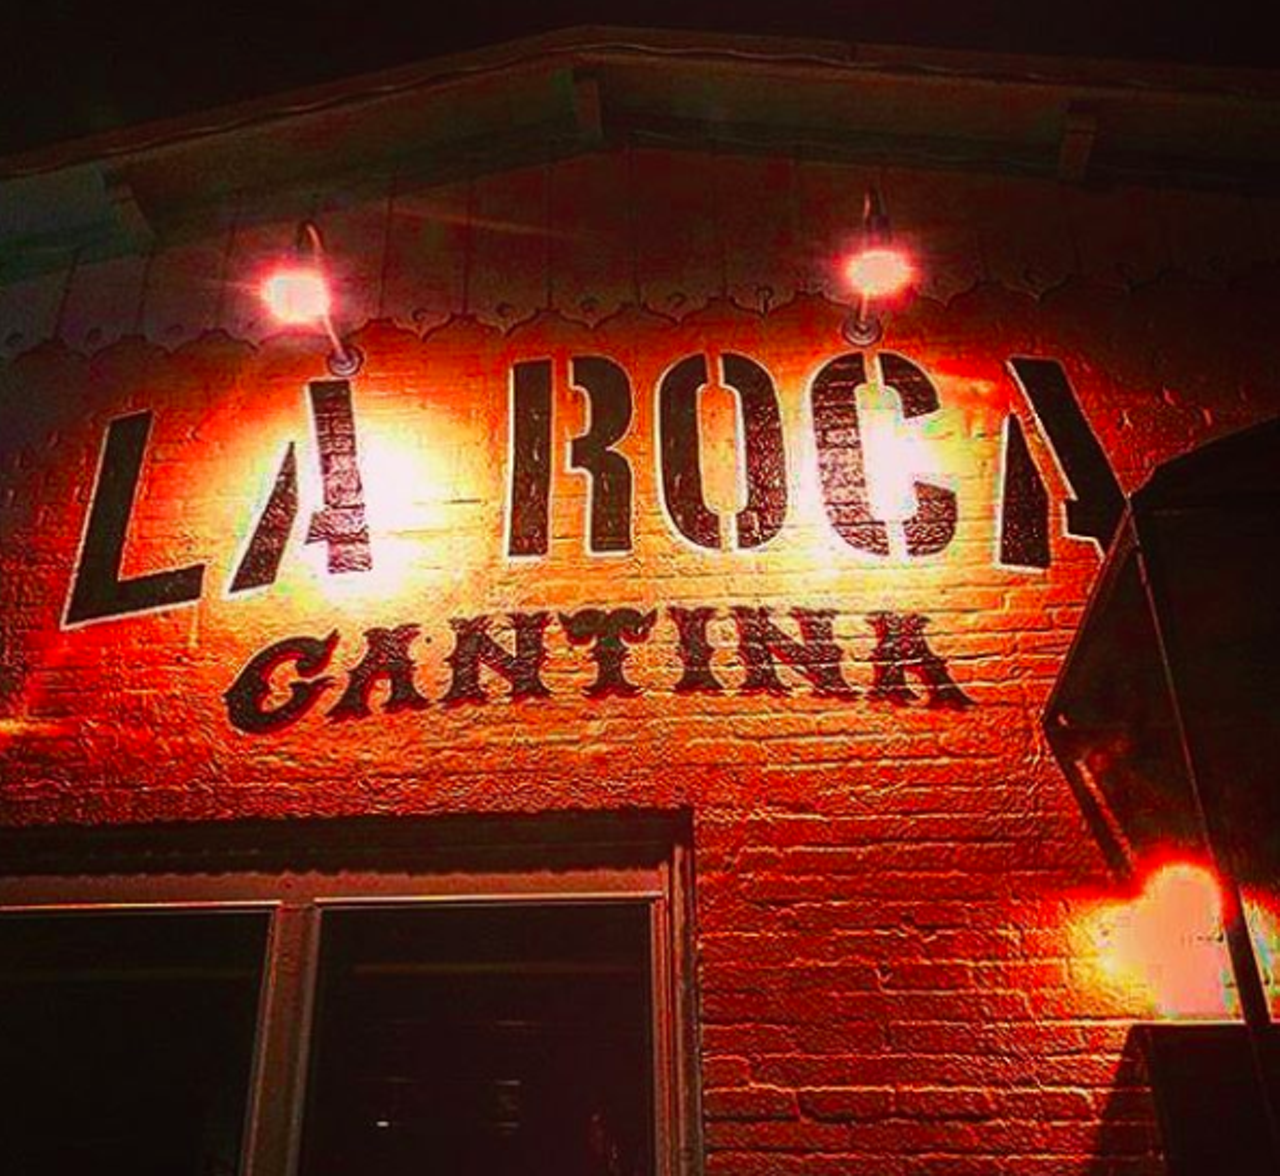 La Roca Cantina
416 8th St., facebook.com
This dance/night club features a lounge to park with some drinks in hand – there’s always great drink specials going on. Just be sure to get your ass out of your chair and dance your booty off, too.
Photo via Instagram / ey219